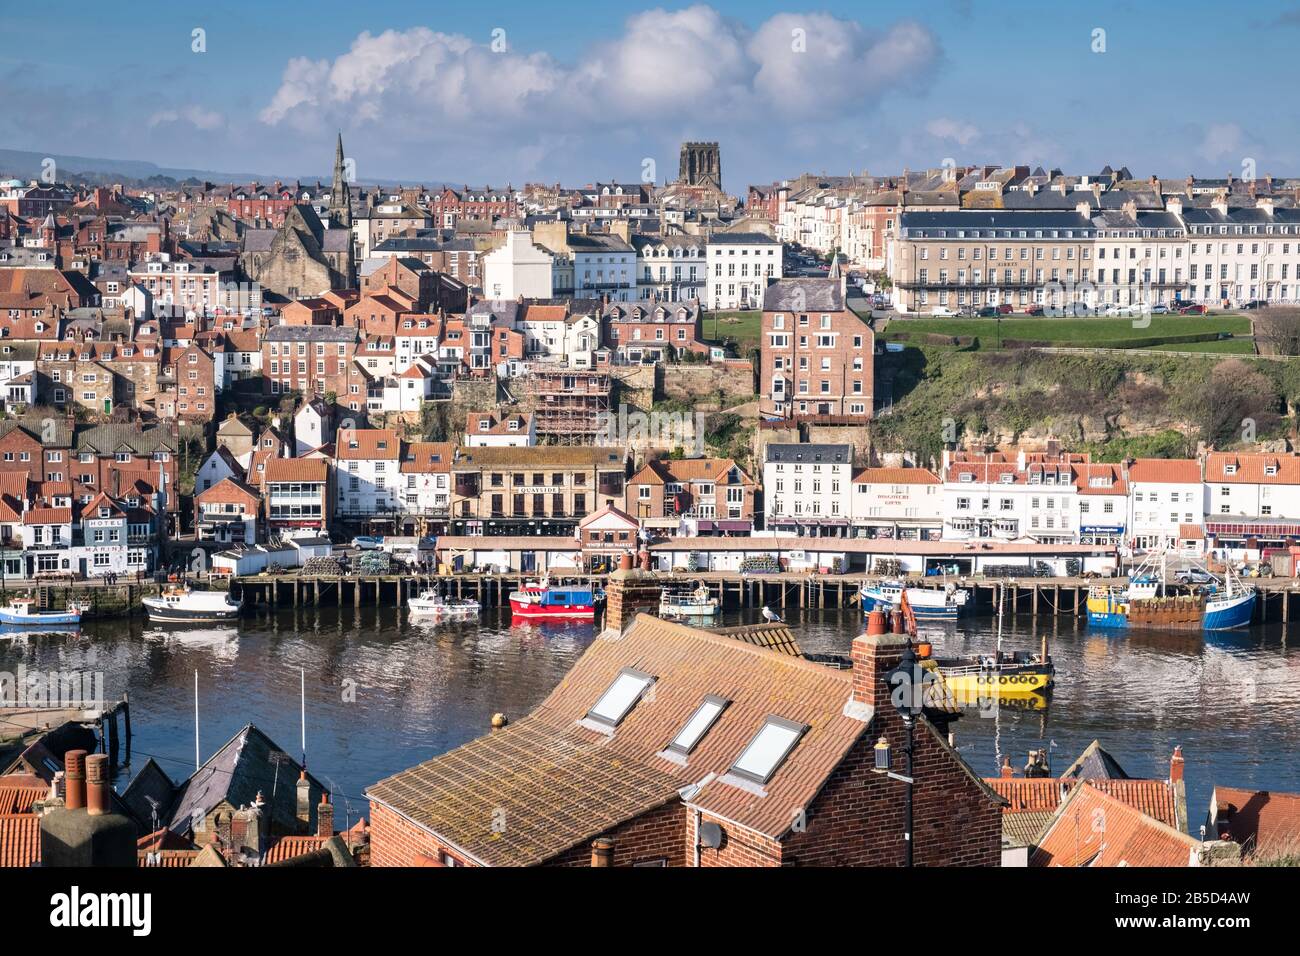 View of buildings and houses on the east side of Whitby harbour, a popular and picturesque town on the North Yorkshire coast, England, UK Stock Photo